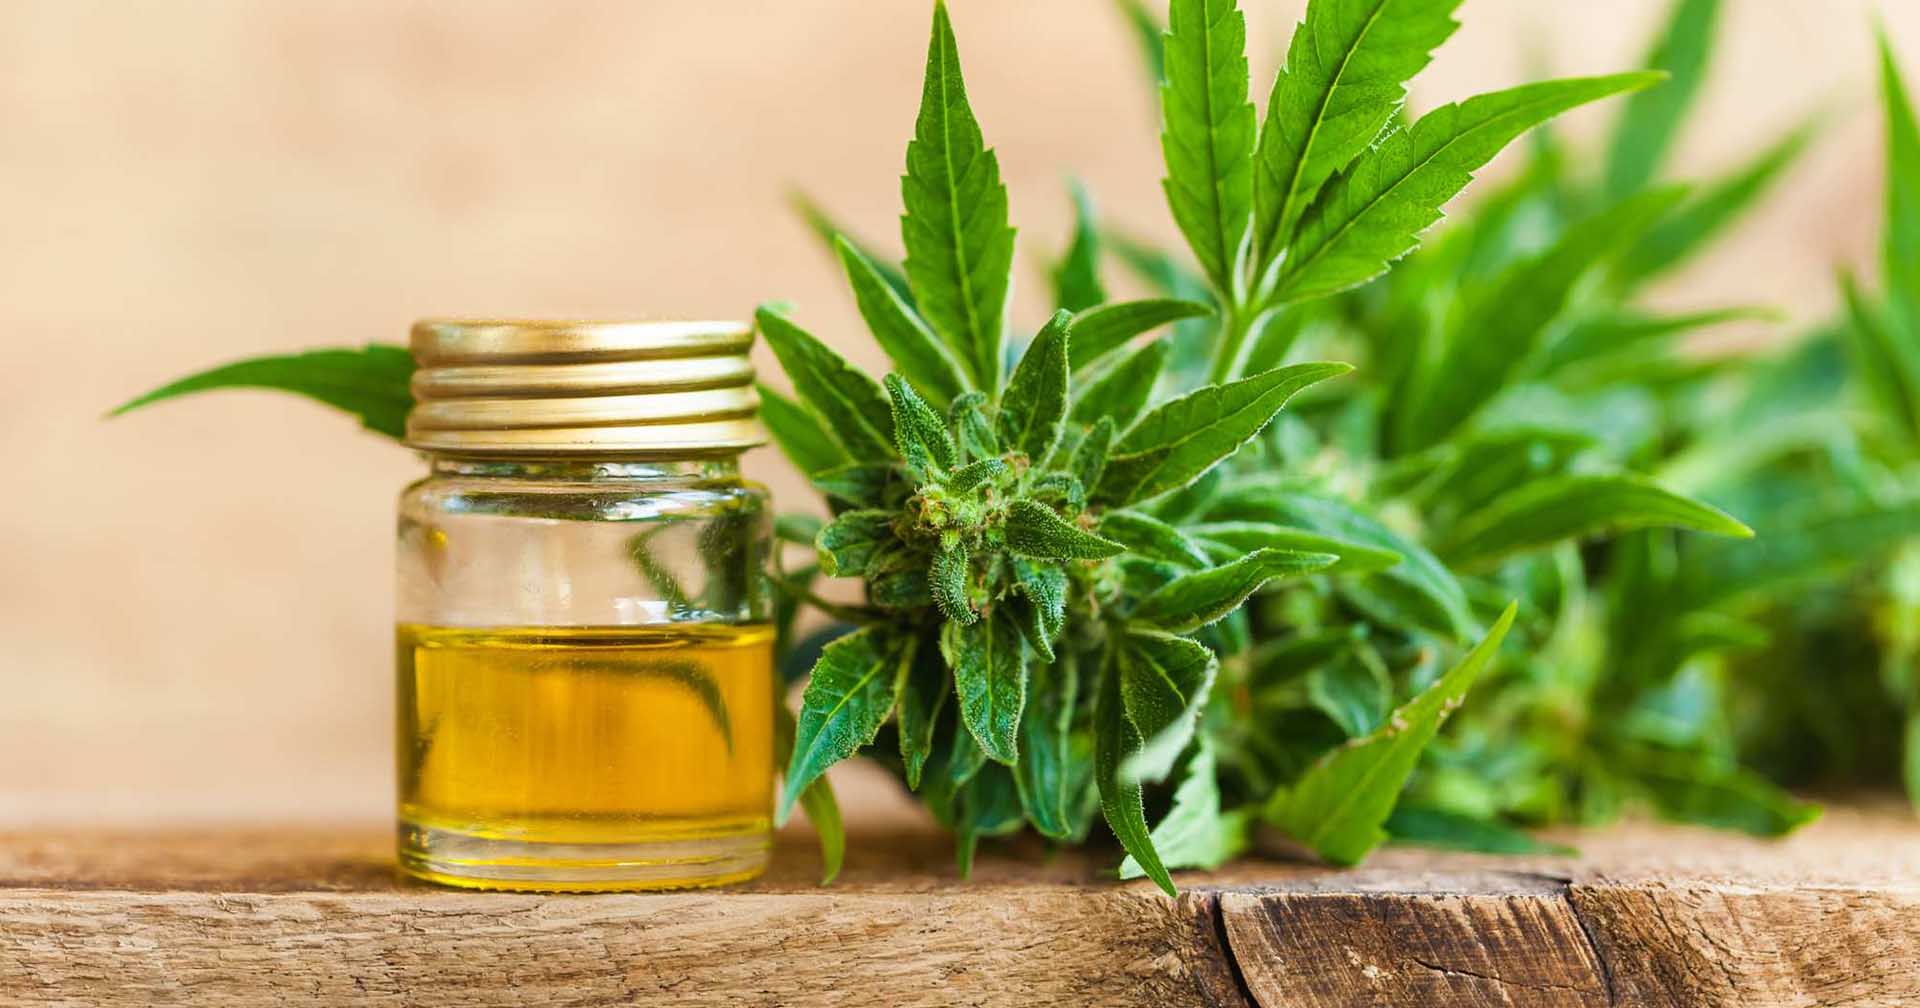  Why CBD products is so Popular in USA?